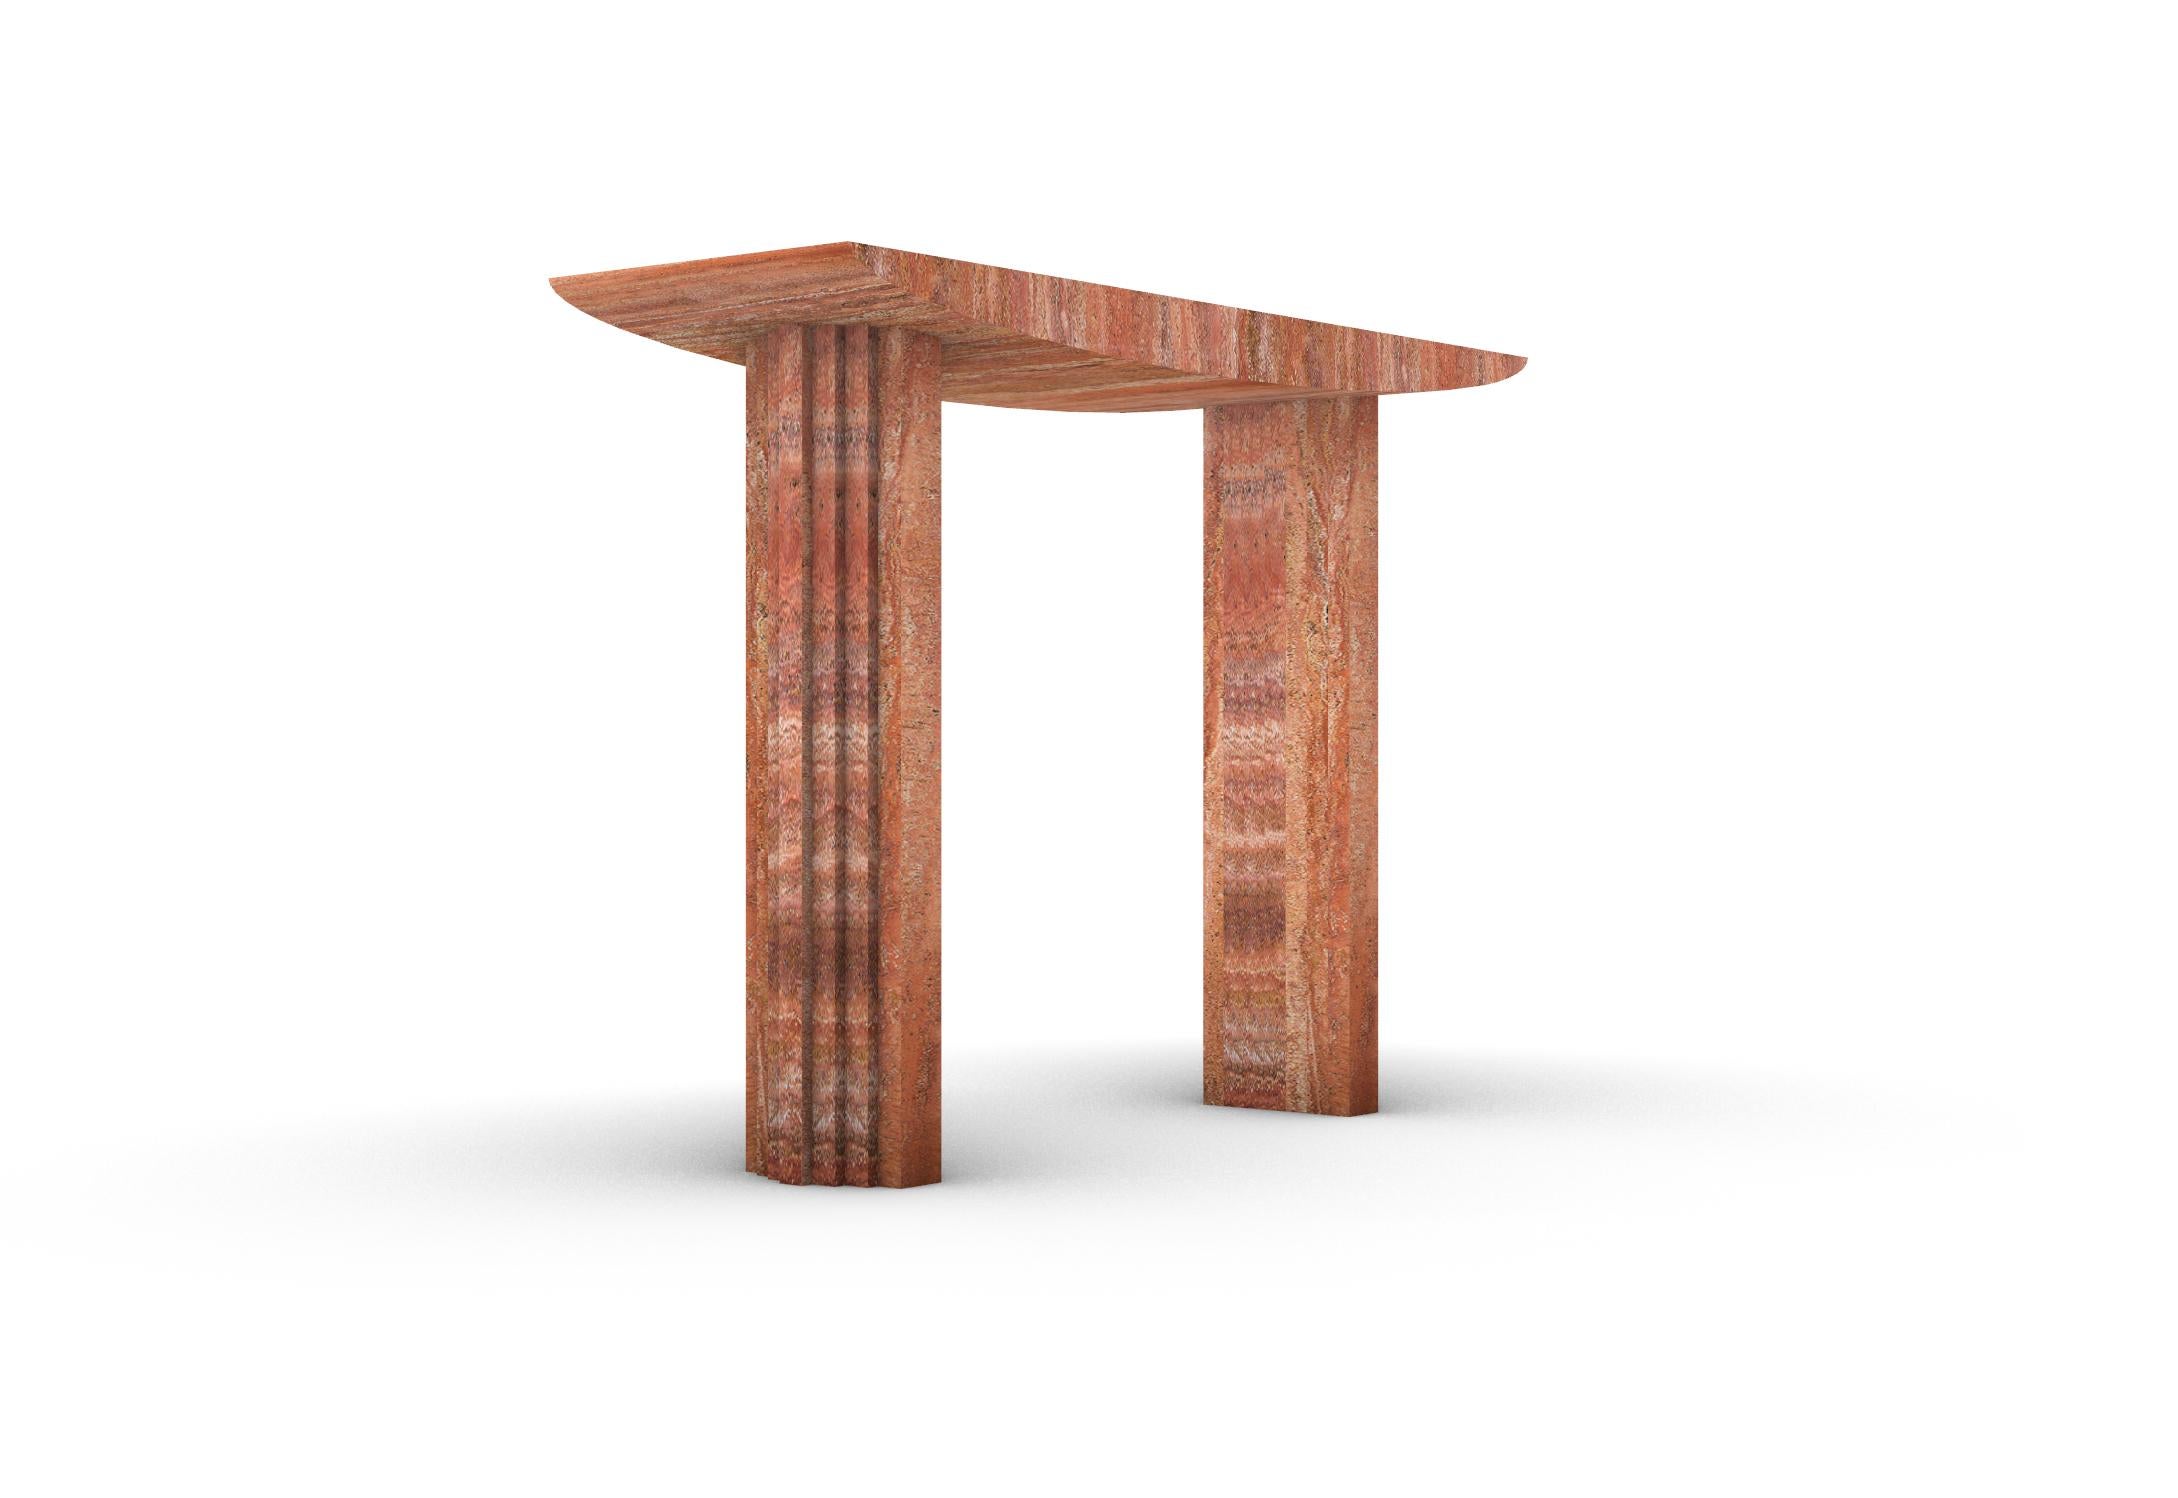 Contemporary Sculptural Console table 0024c in Red Travertine stone by artist Desia Ava For Sale